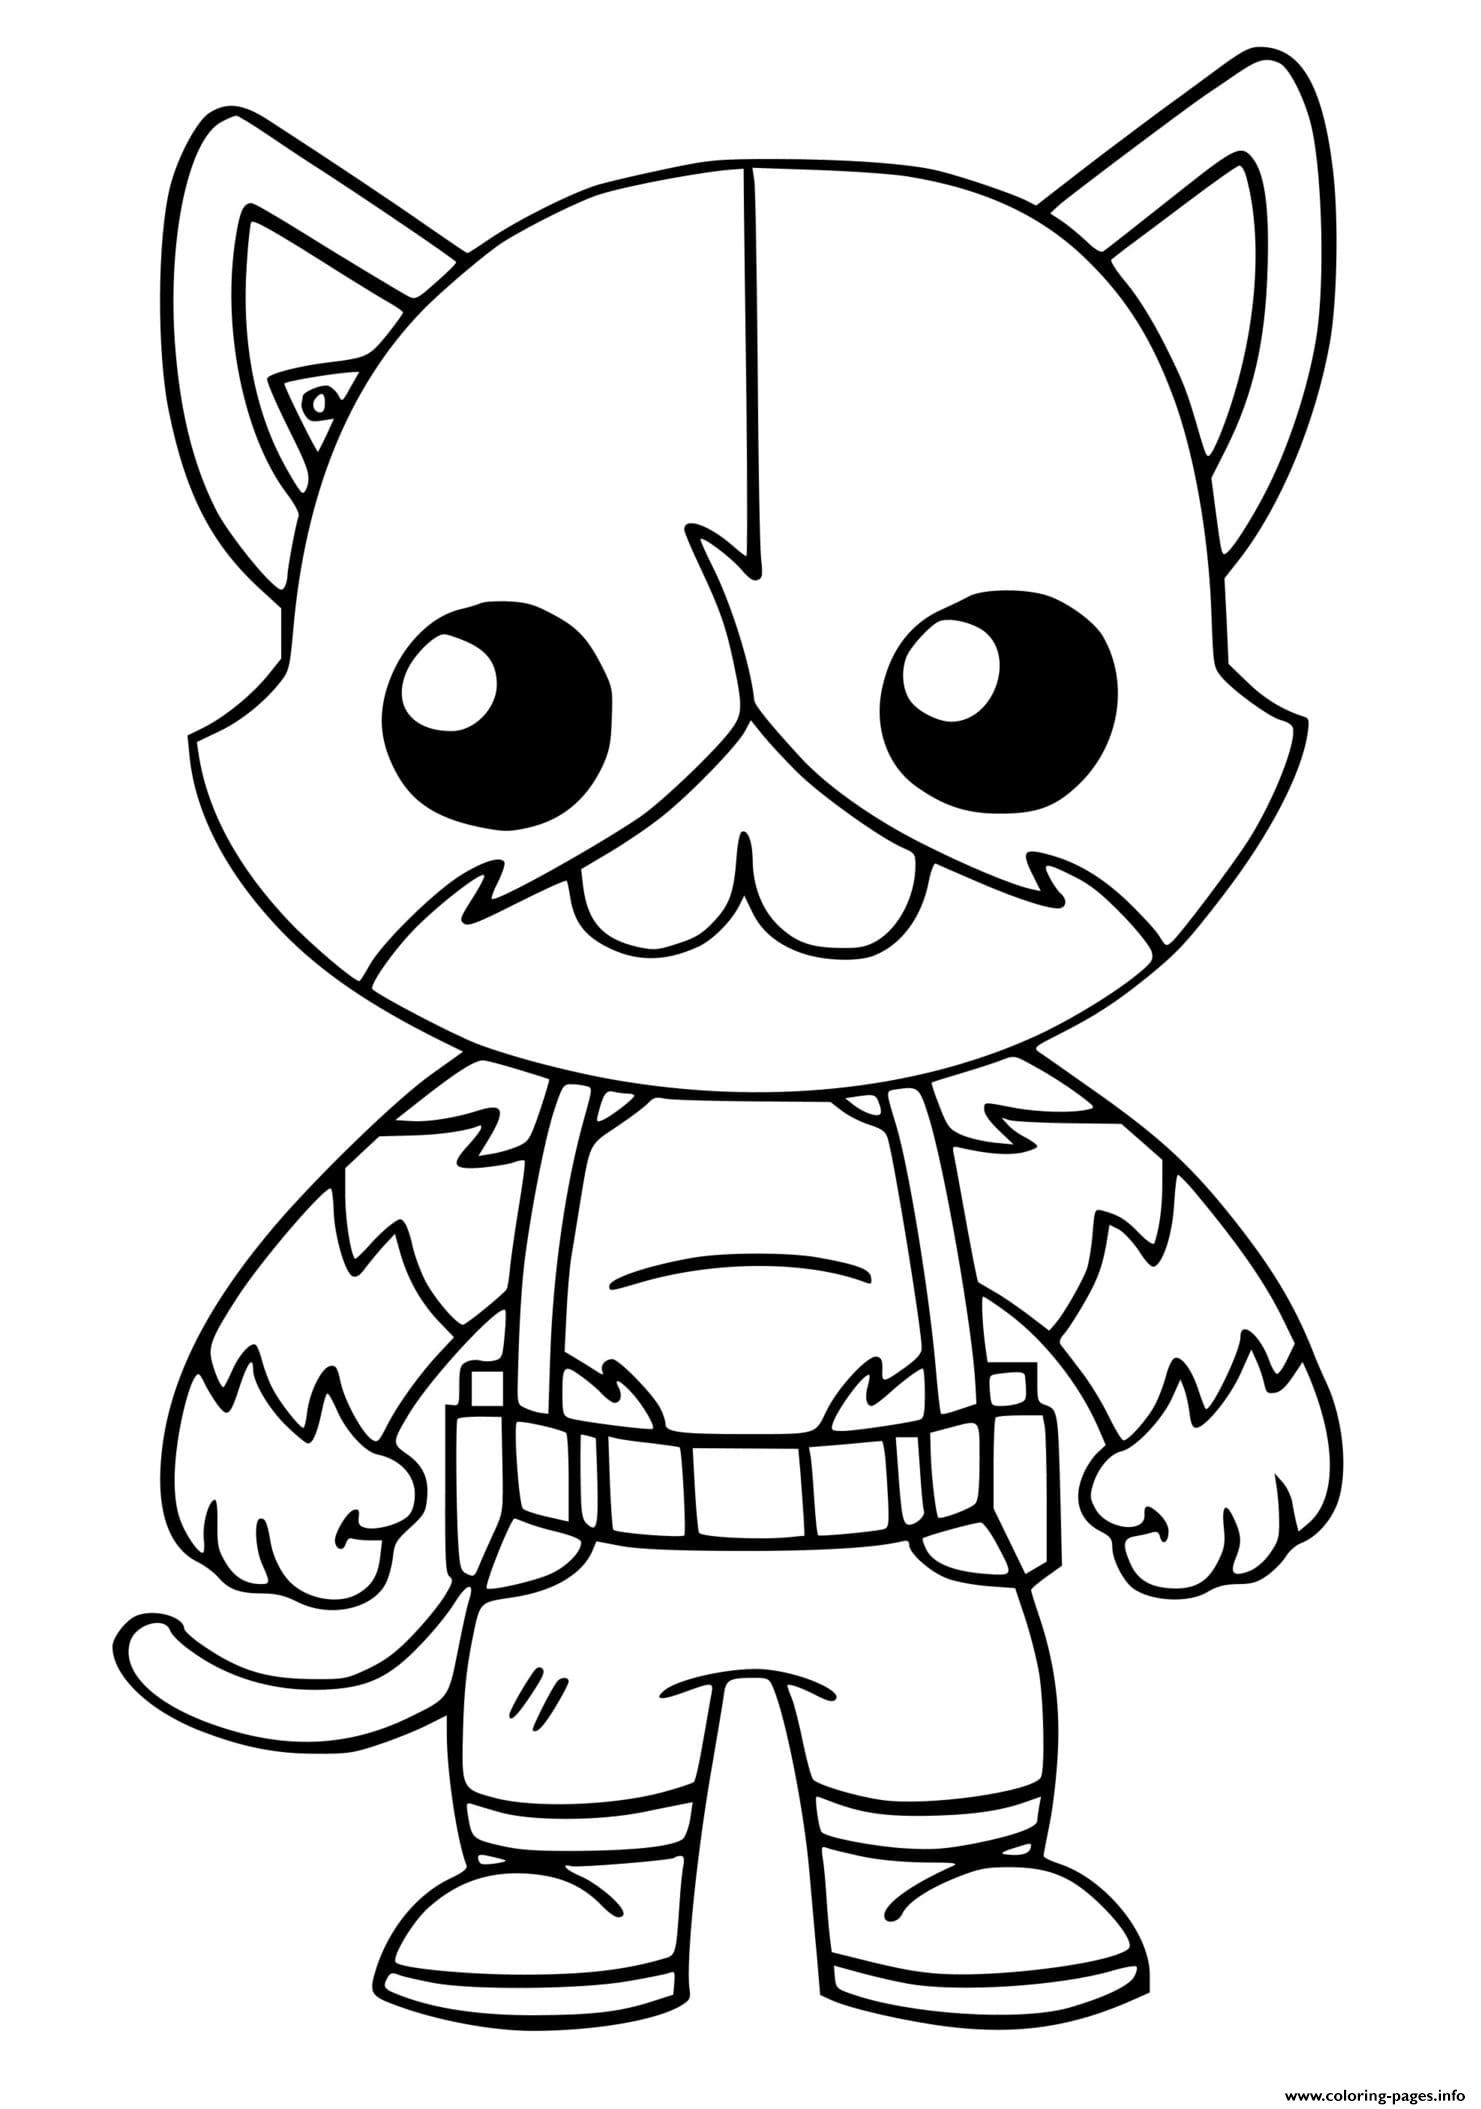 Meowscles Top Secret Fortnite Coloring Pages Printable